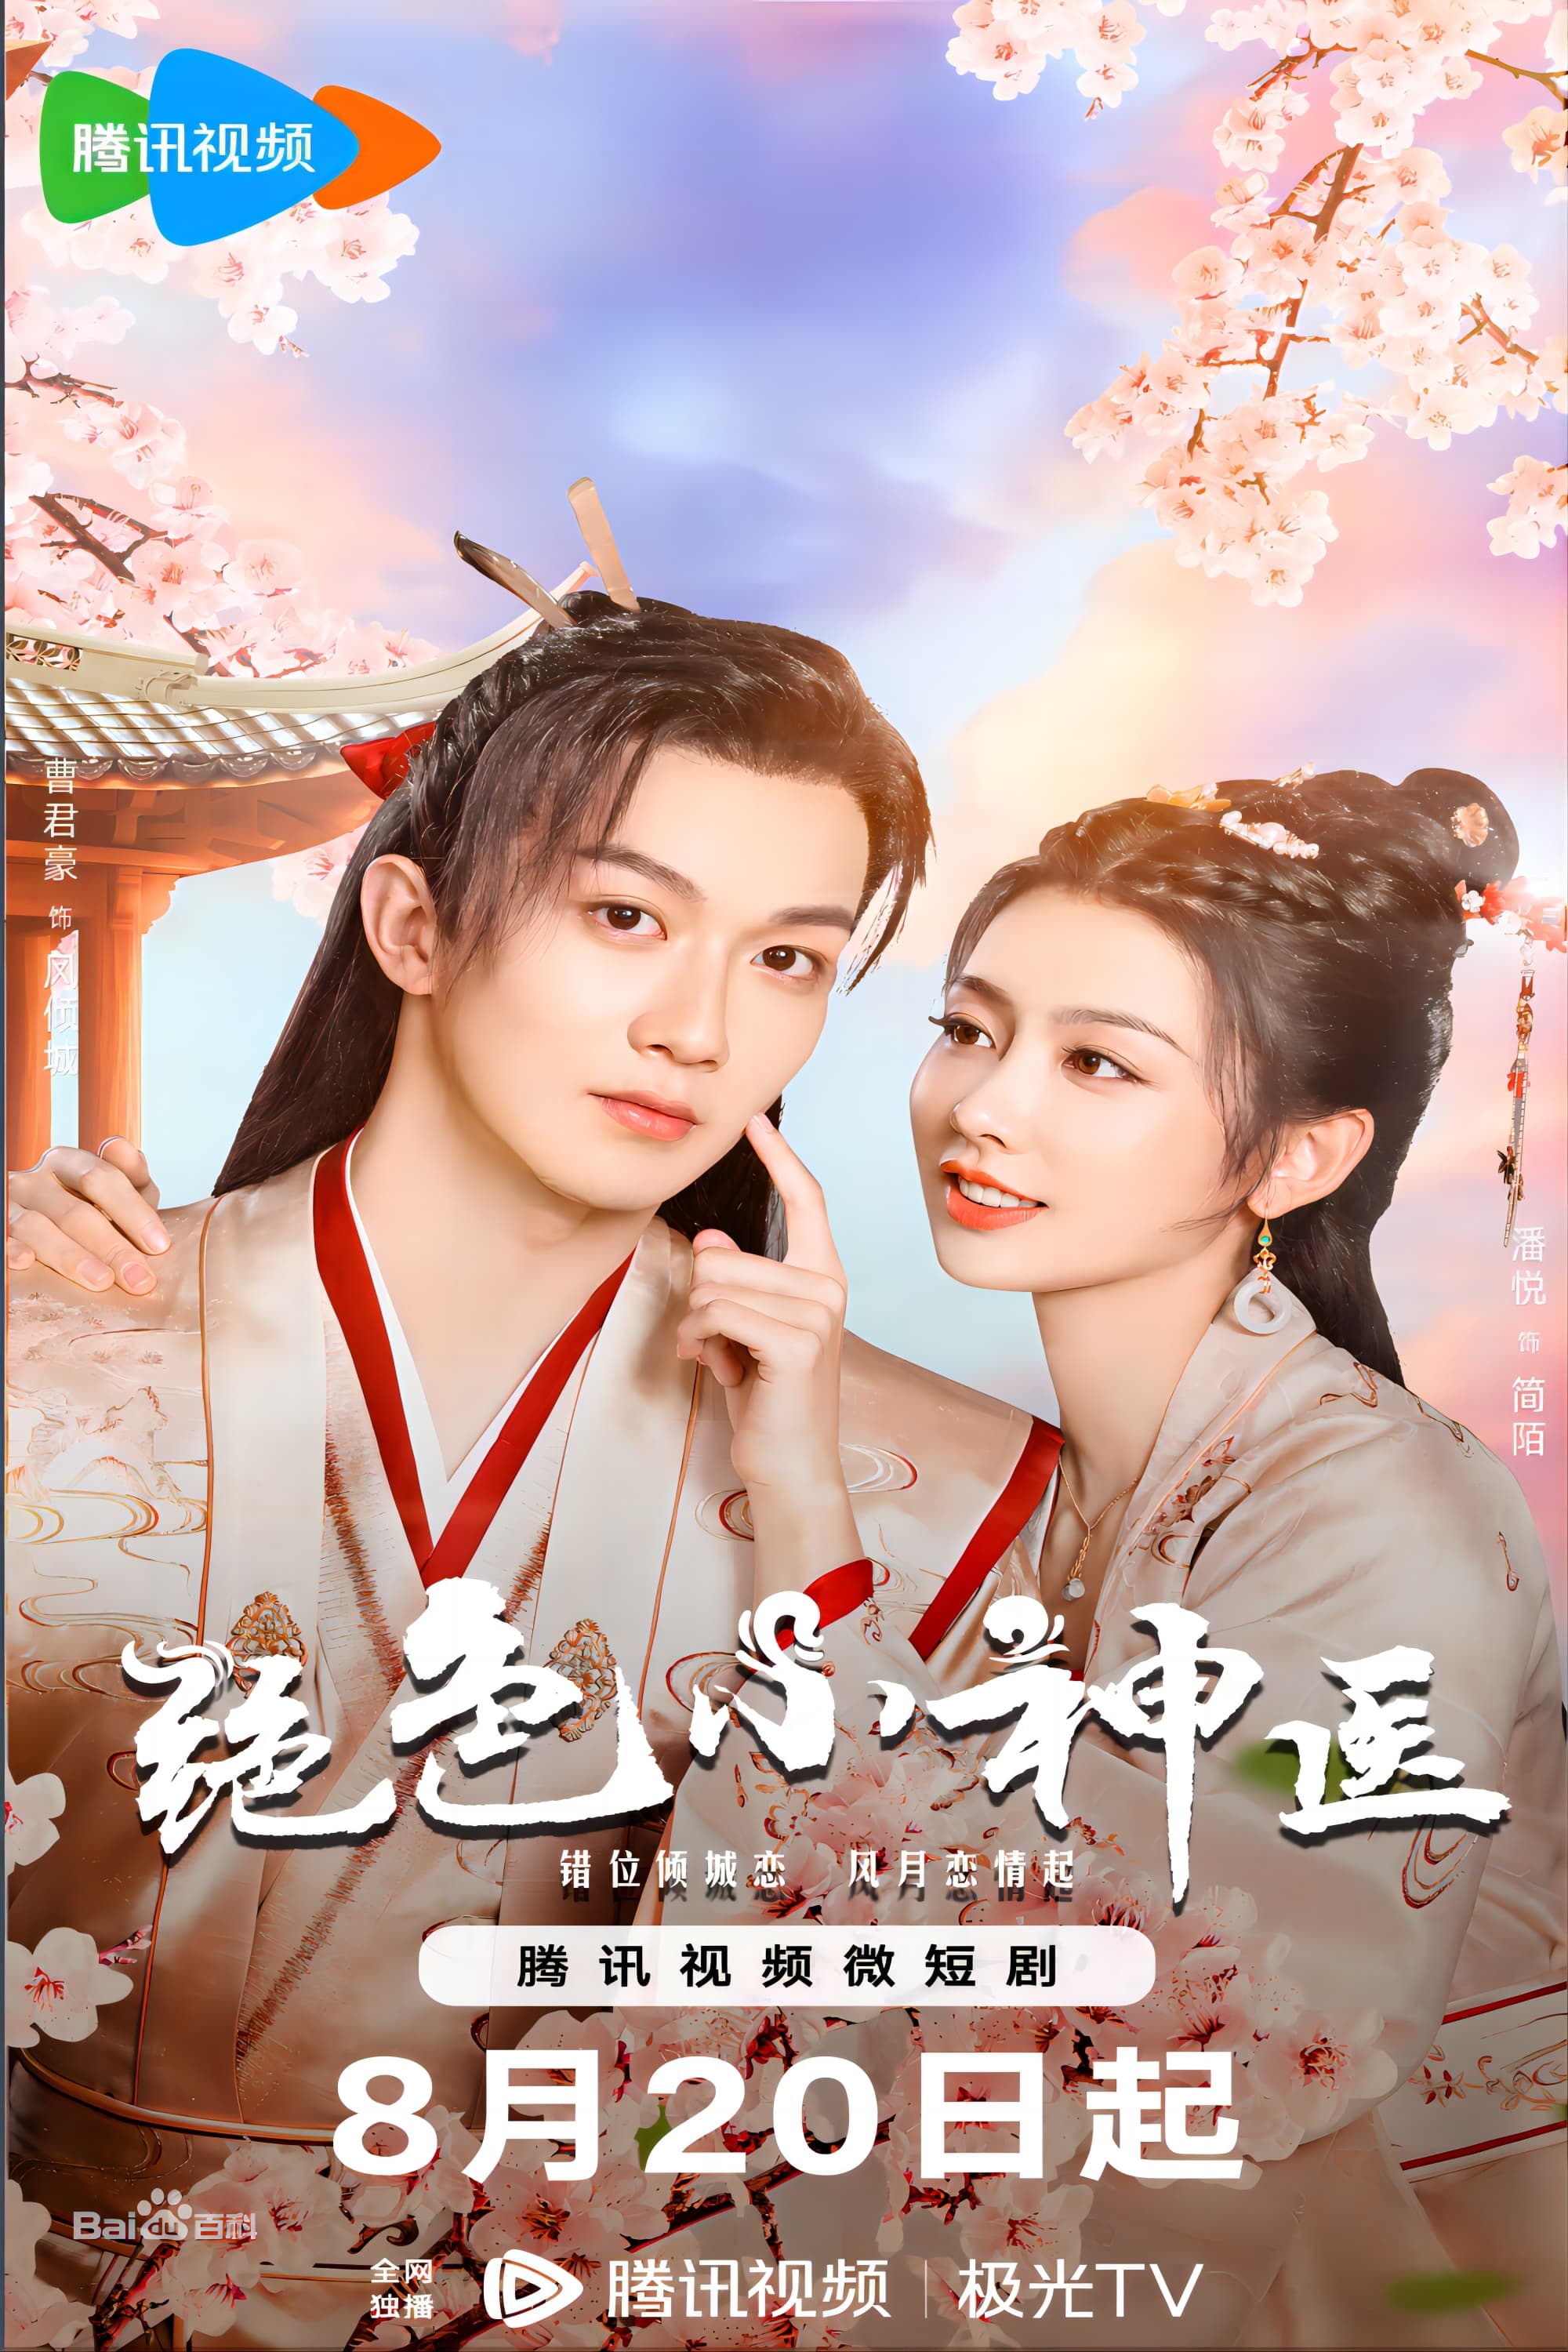 Banner Phim Tuyệt Sắc Tiểu Thần Y (Ms. Fantastic Miracle Doctor)